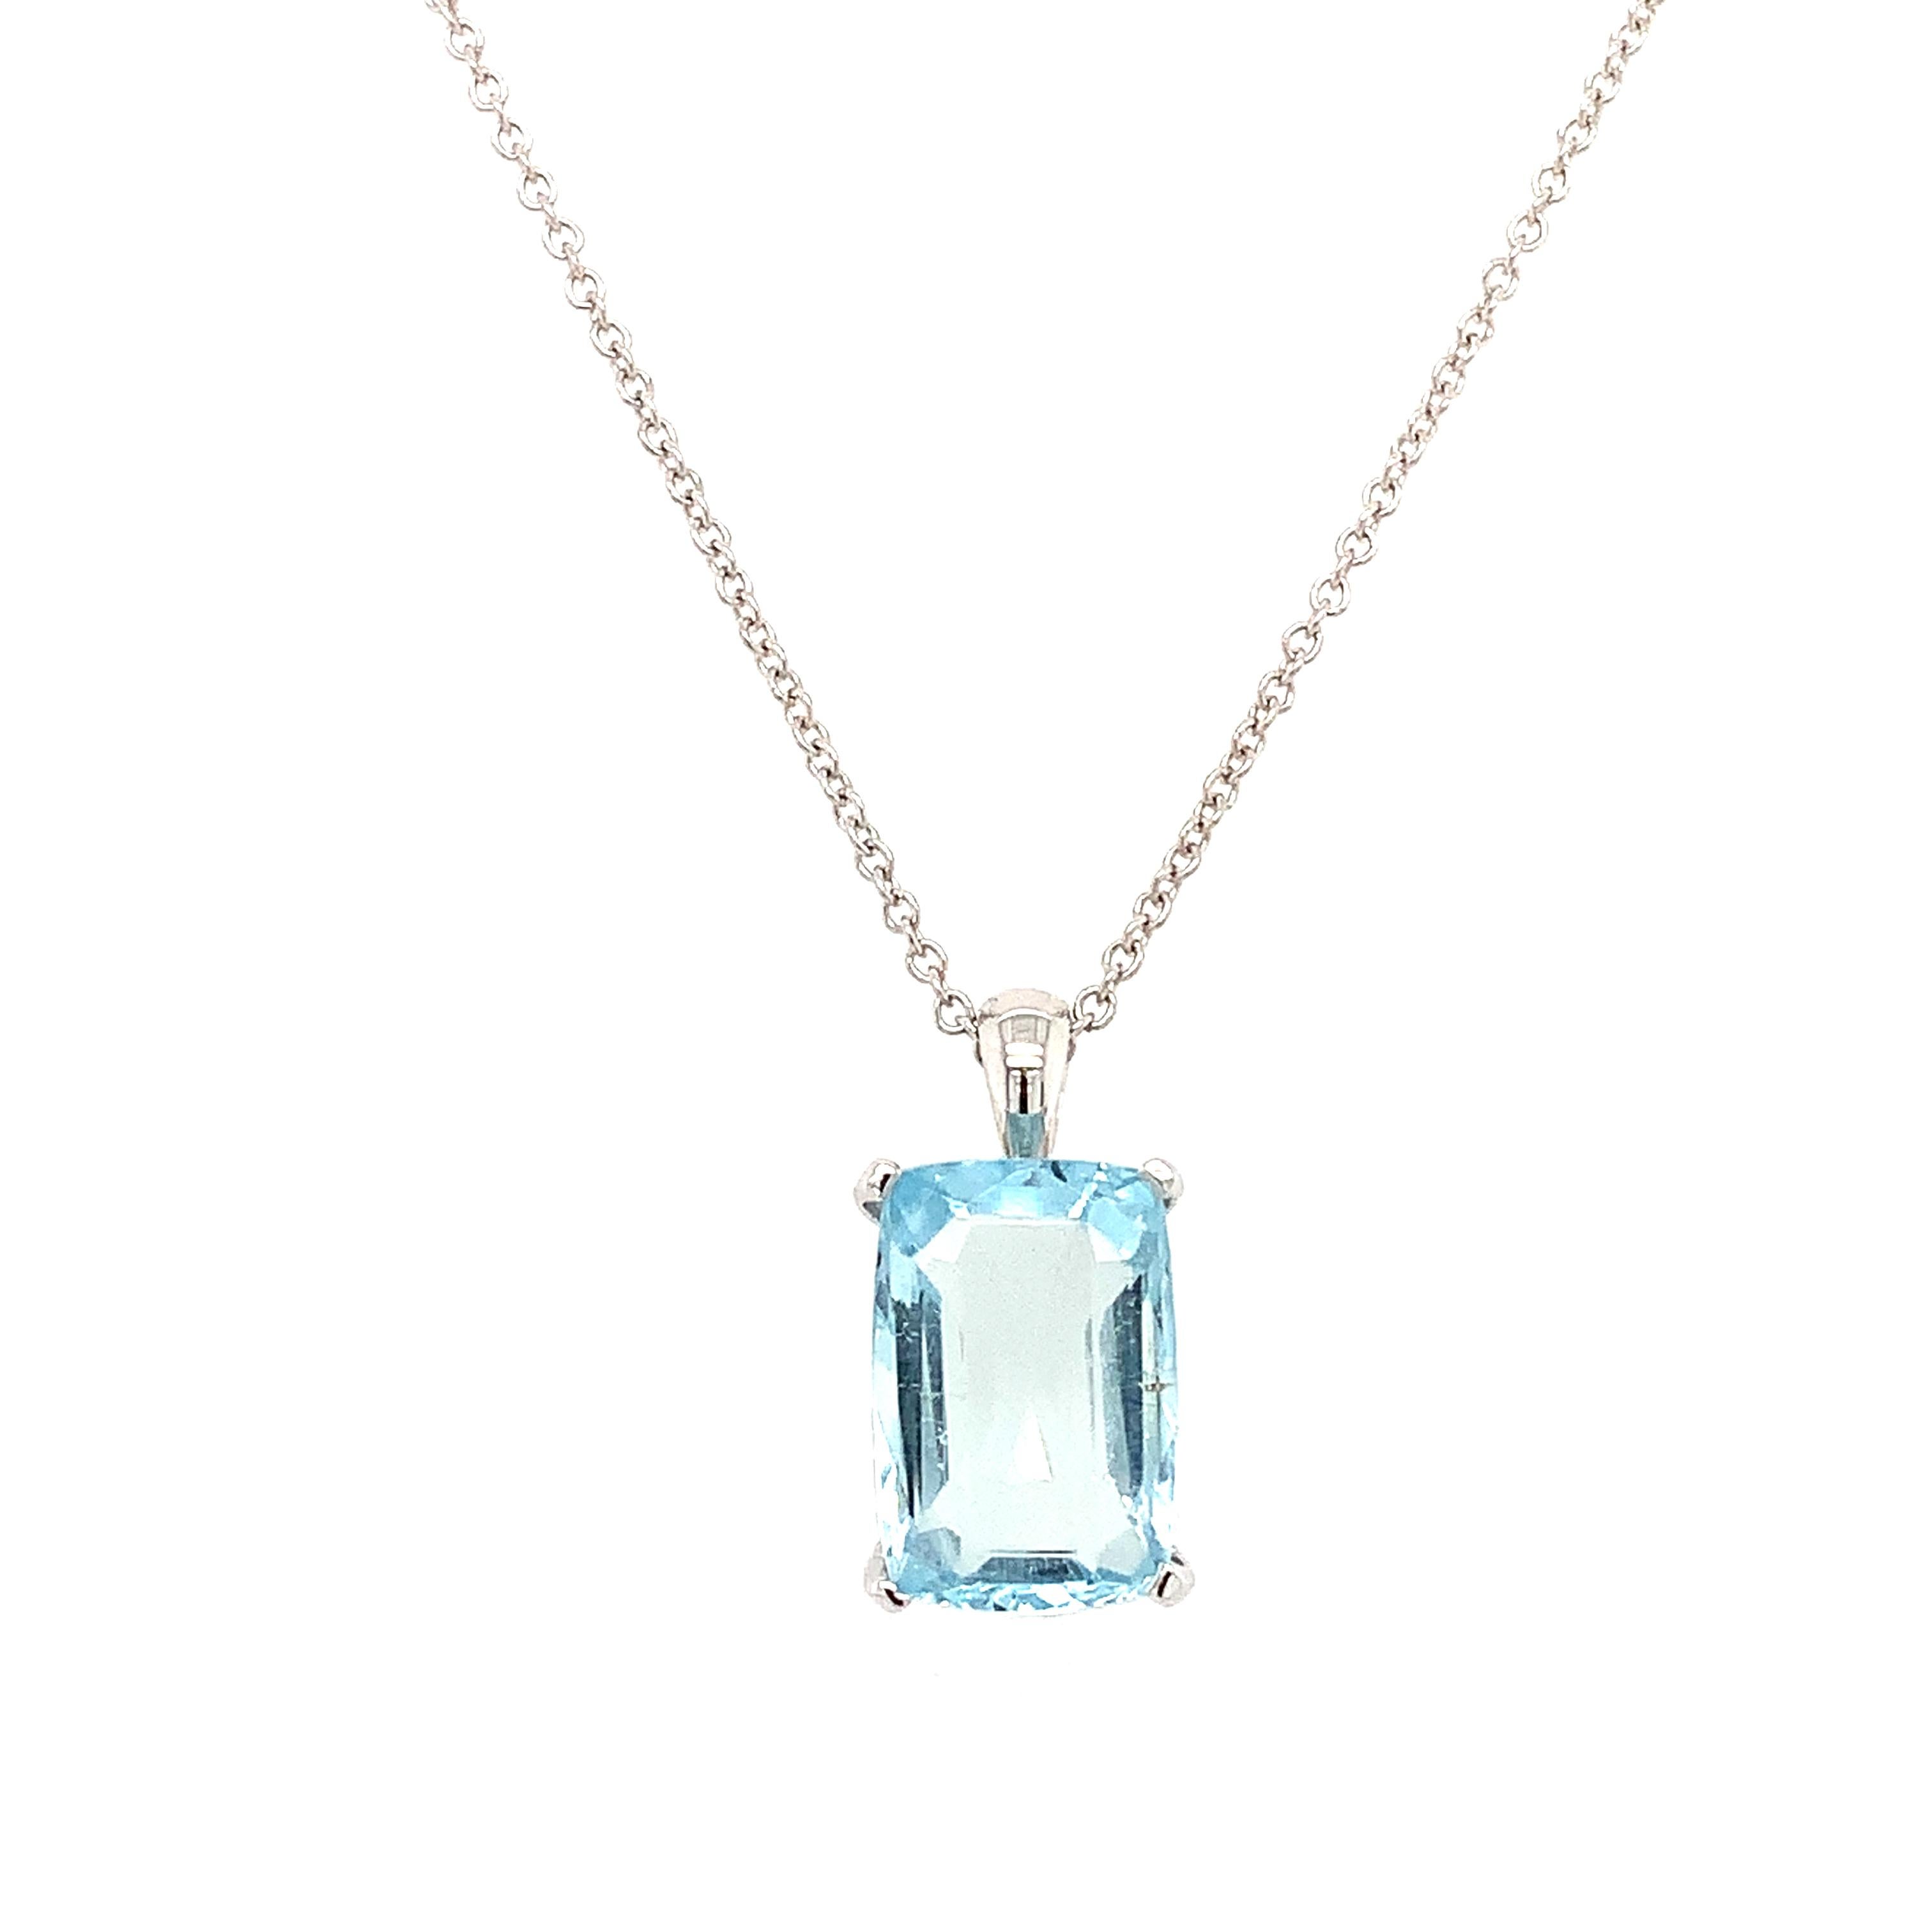 Aquamarine emerald cut solitaire pendant necklace 18k white gold
Aquamarine gemstone light blue emerald shaped total weight 2.50ct
Hallmark
Chain length 18 inches
Accompanied with valuation.